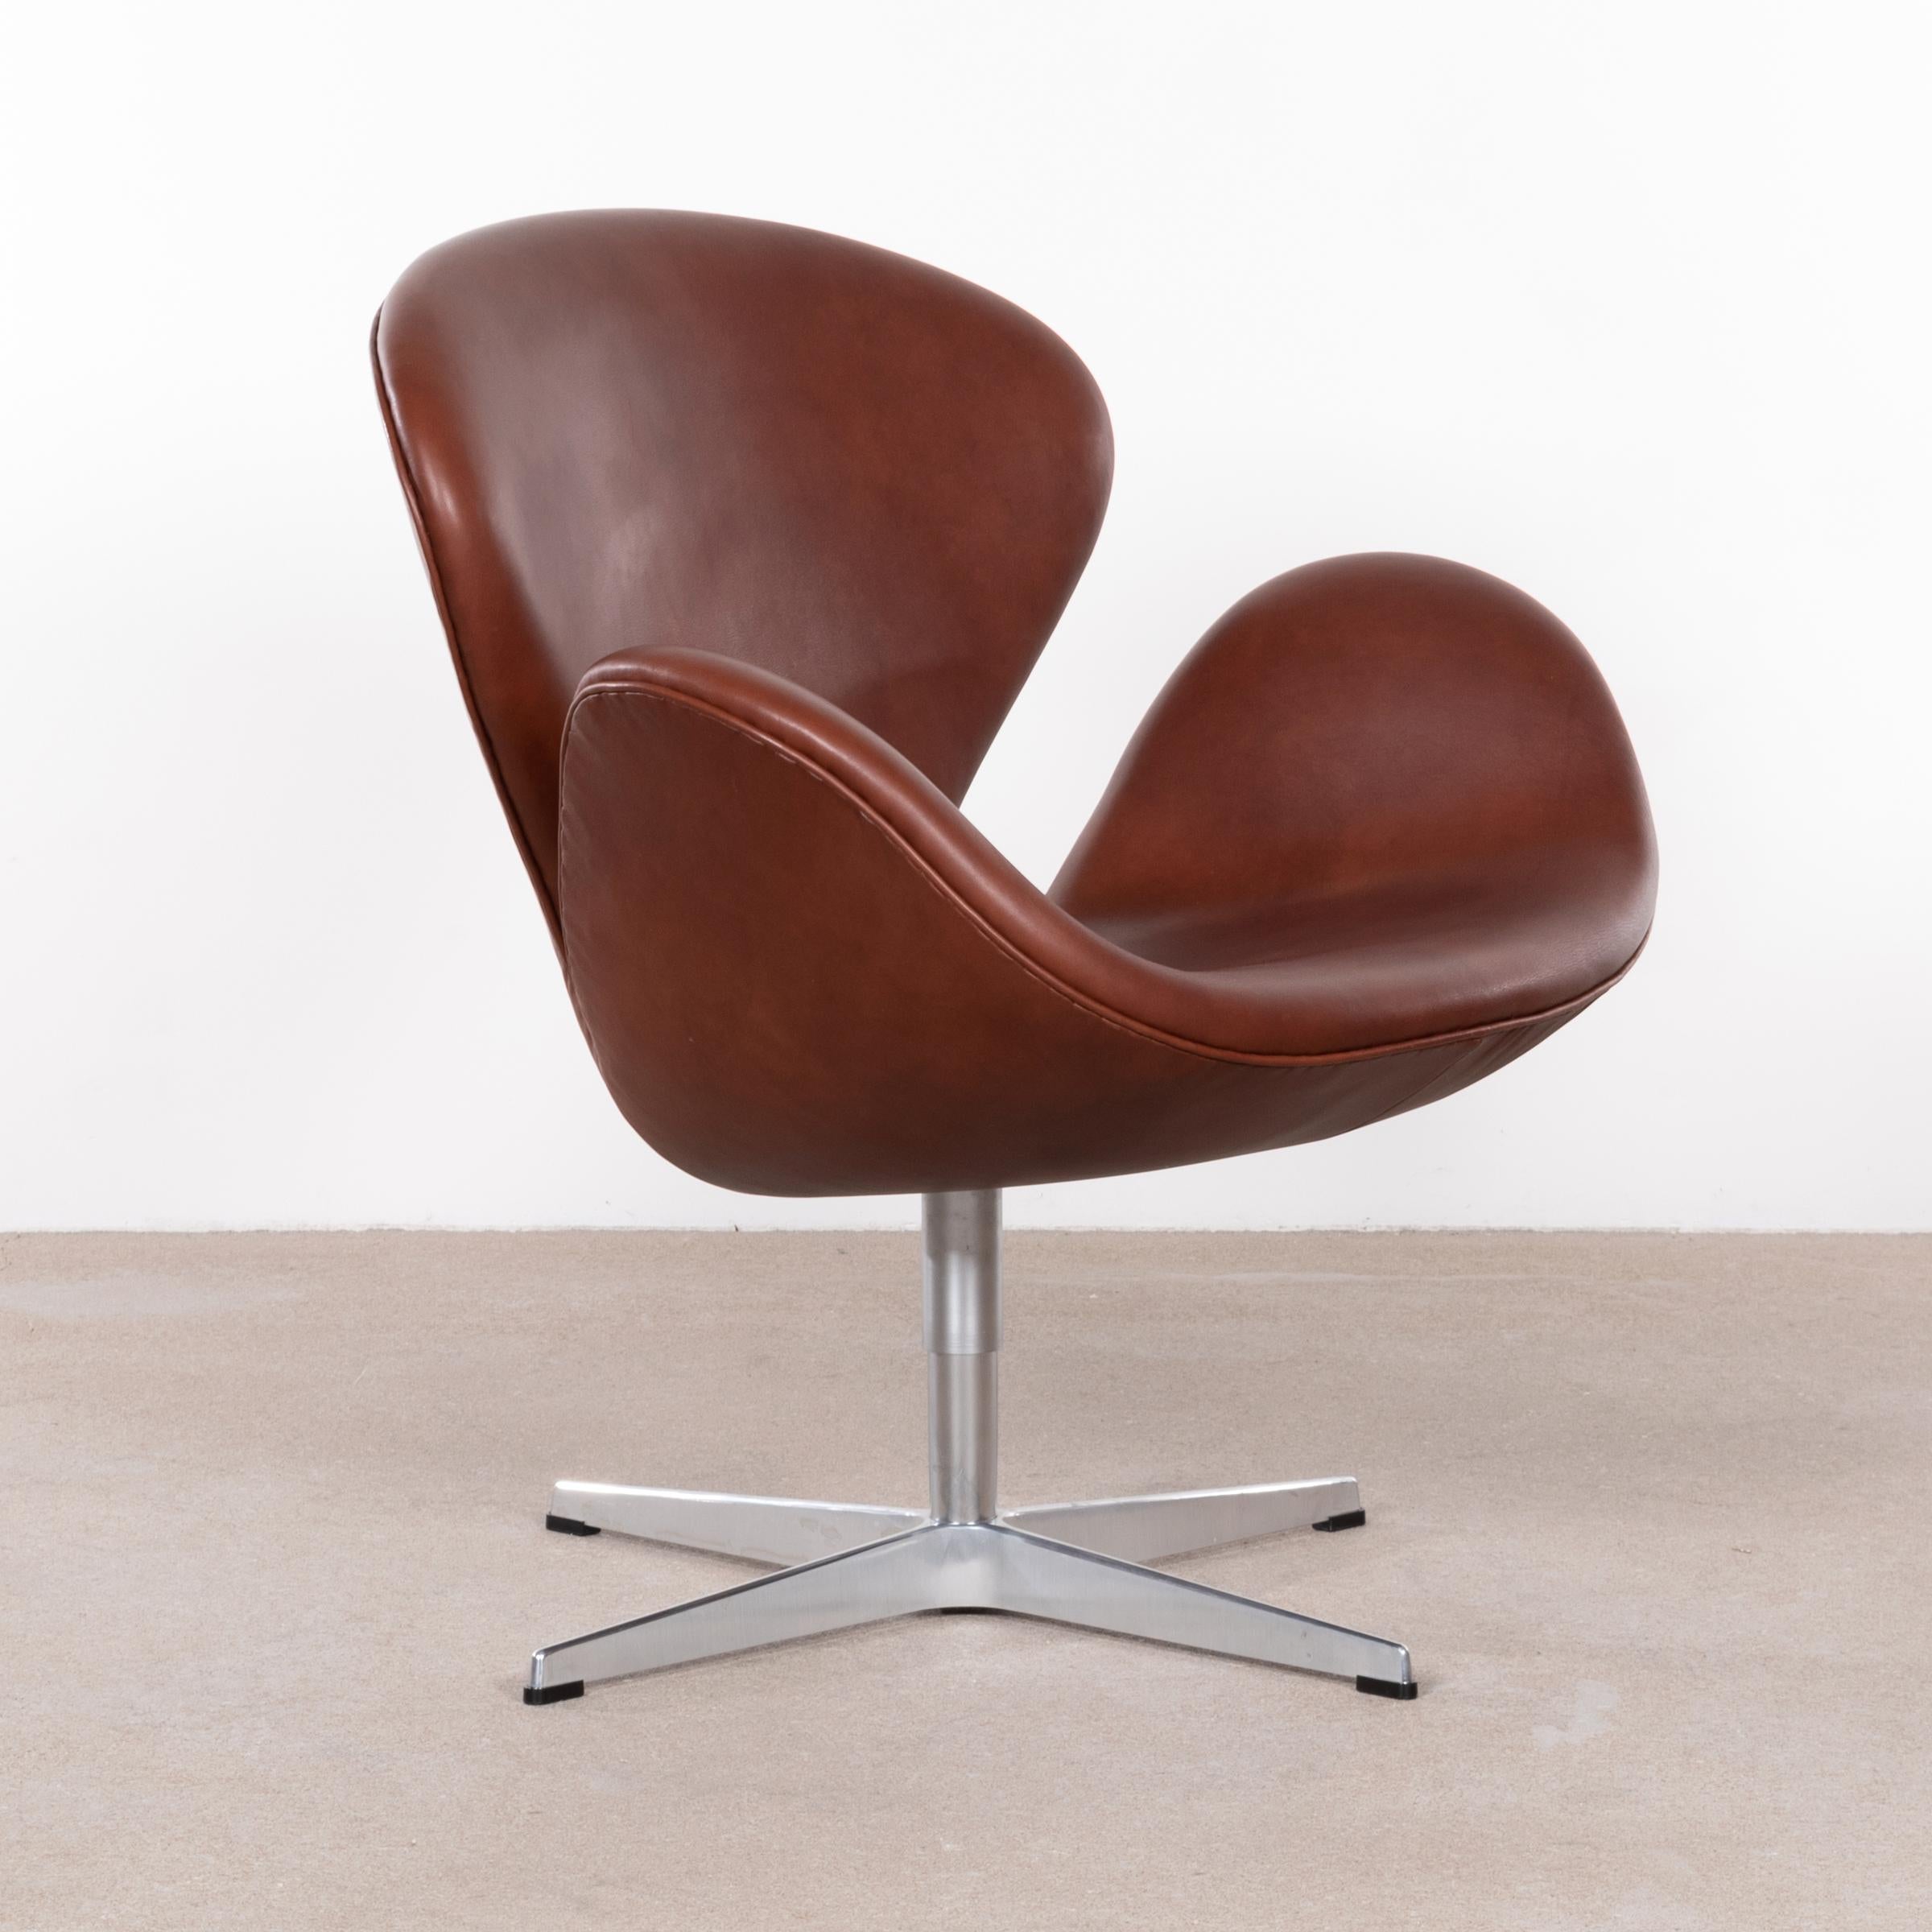 Iconic swan chair by Arne Jacobsen for Fritz Hansen (Denmark 2006). Original designed for the Hotel Royal in Copenhagen late 1950s. The chair is upholstered in a soft chestnut brown premium leather and is in very good / excellent condition with only